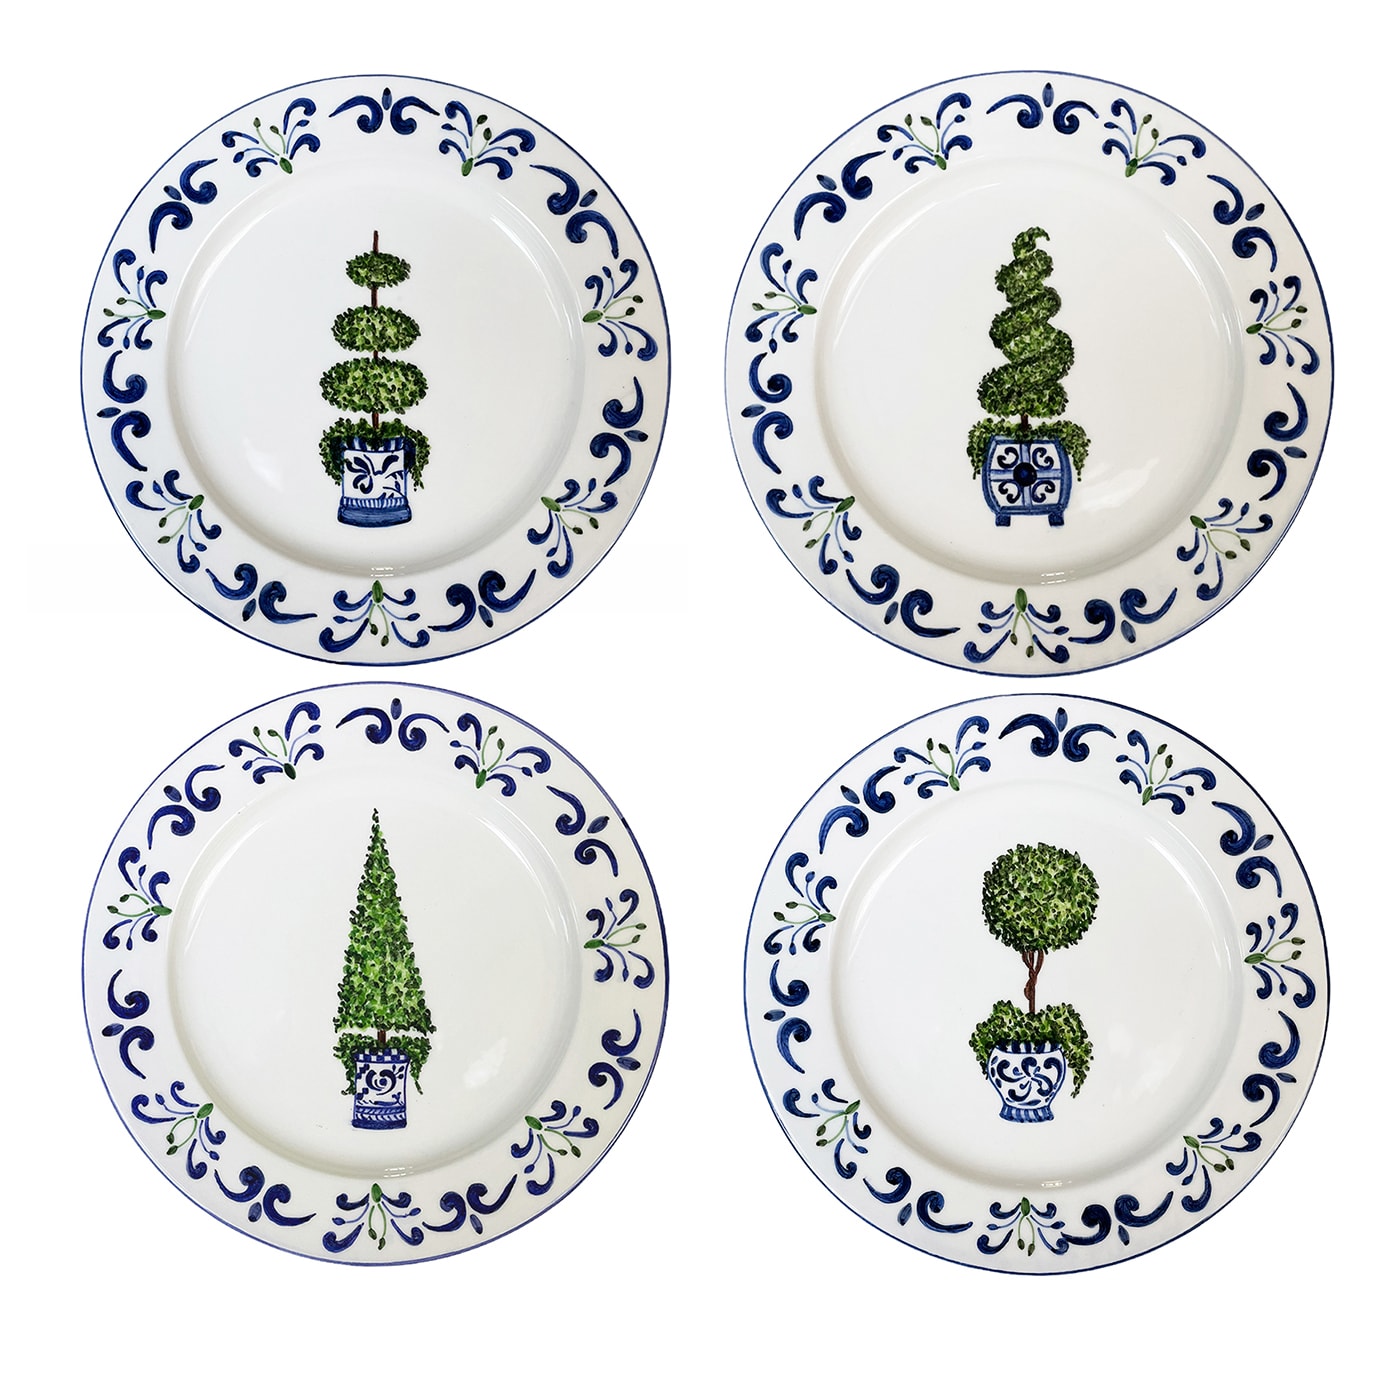 SET OF 4 TOPIARY BLUE DESSERT PLATES - Vio's Cooking